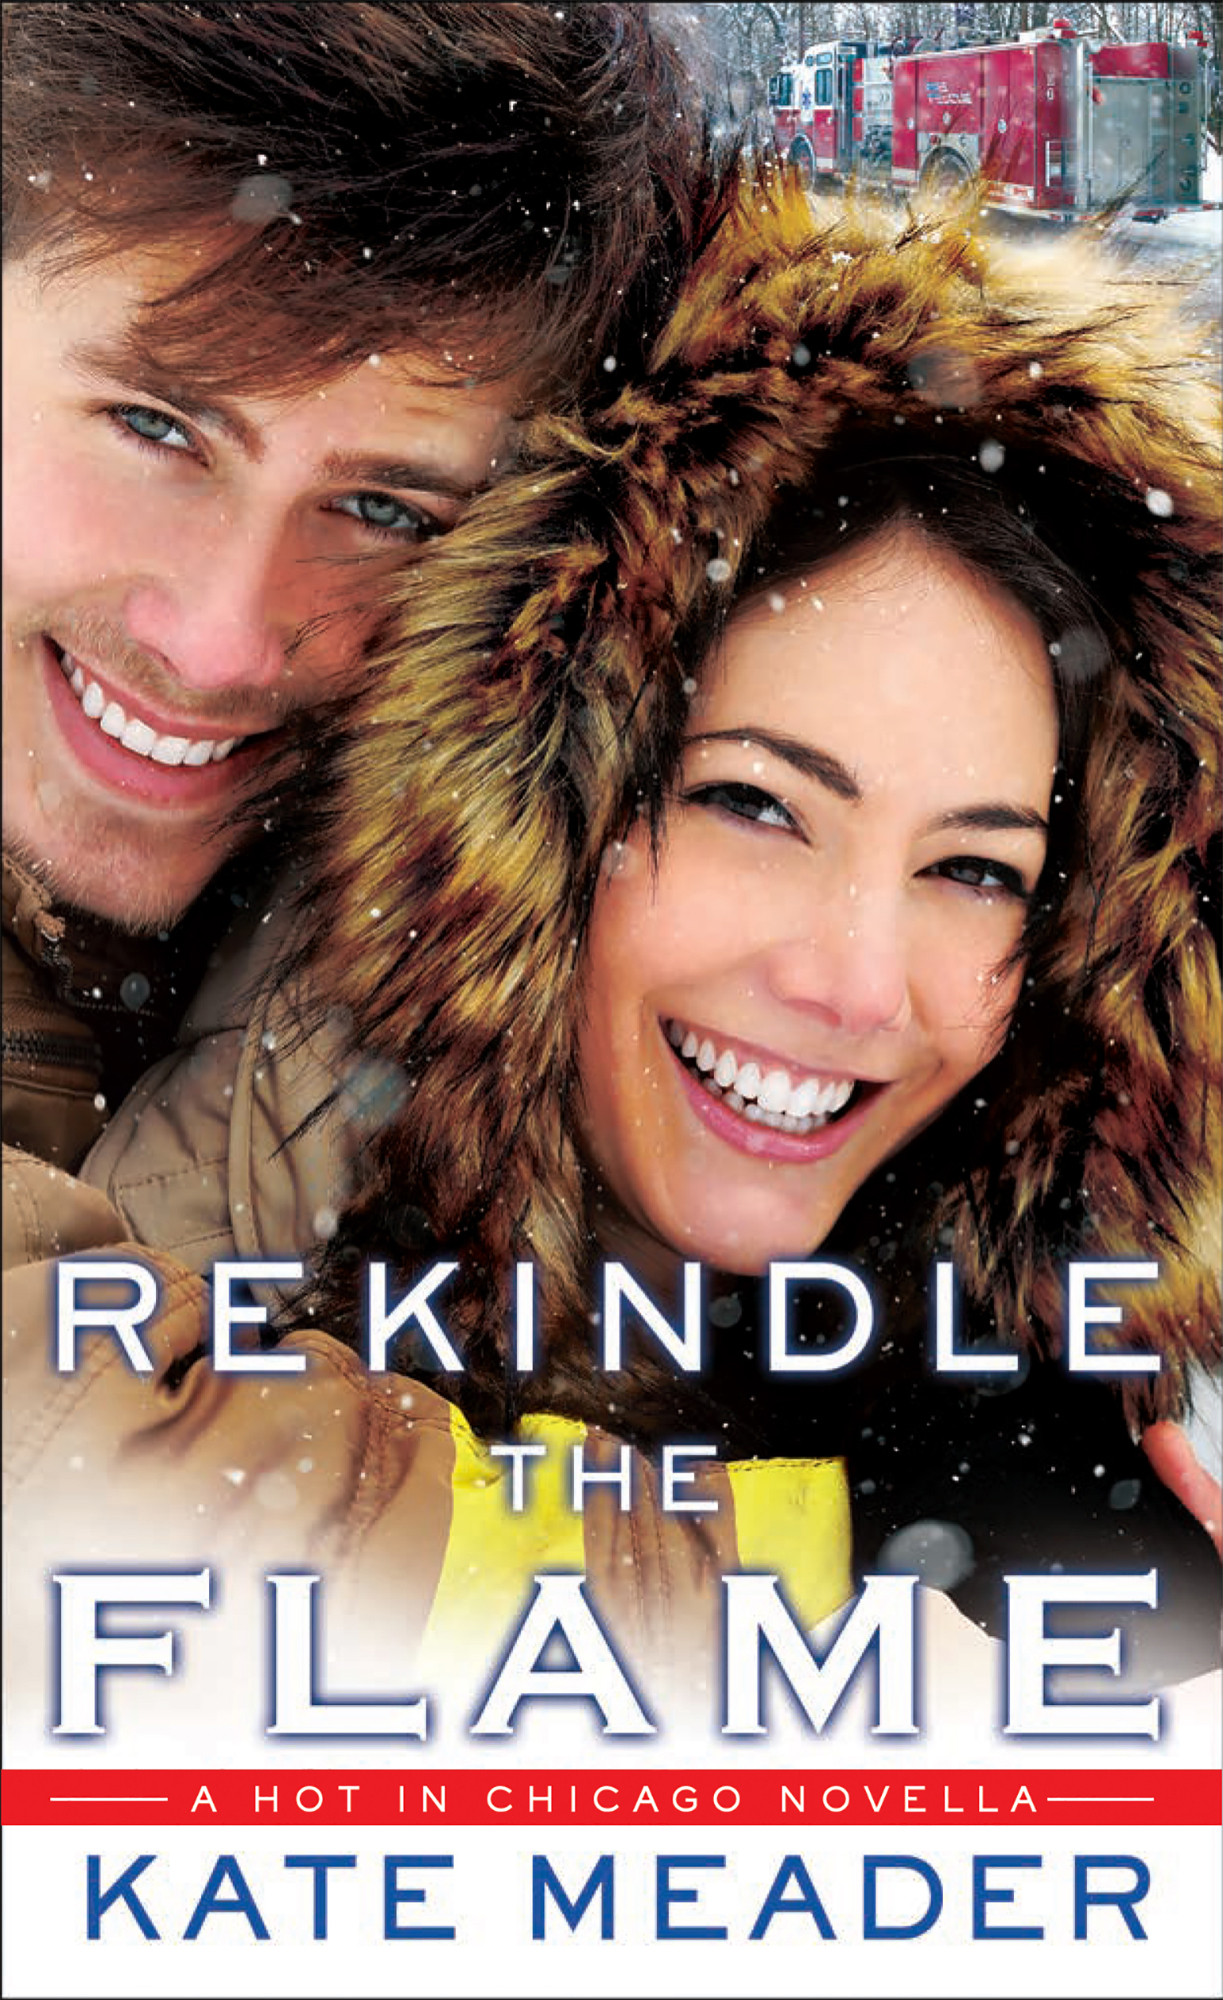 Rekindle the Flame (2015) by Kate Meader